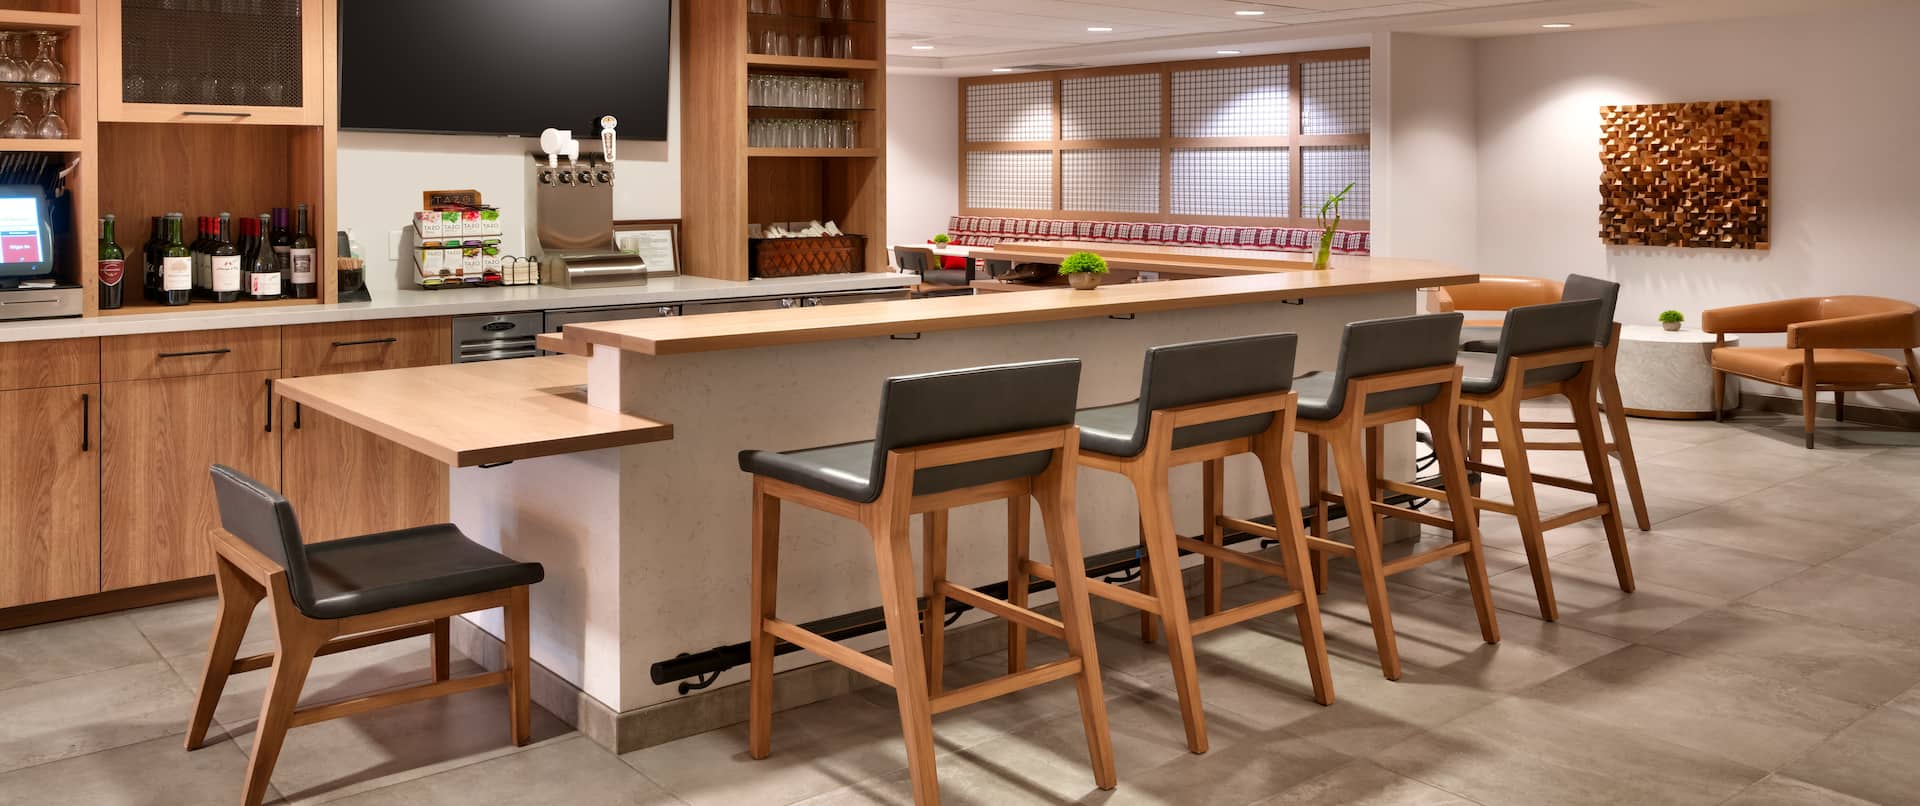 Bar area with stools 